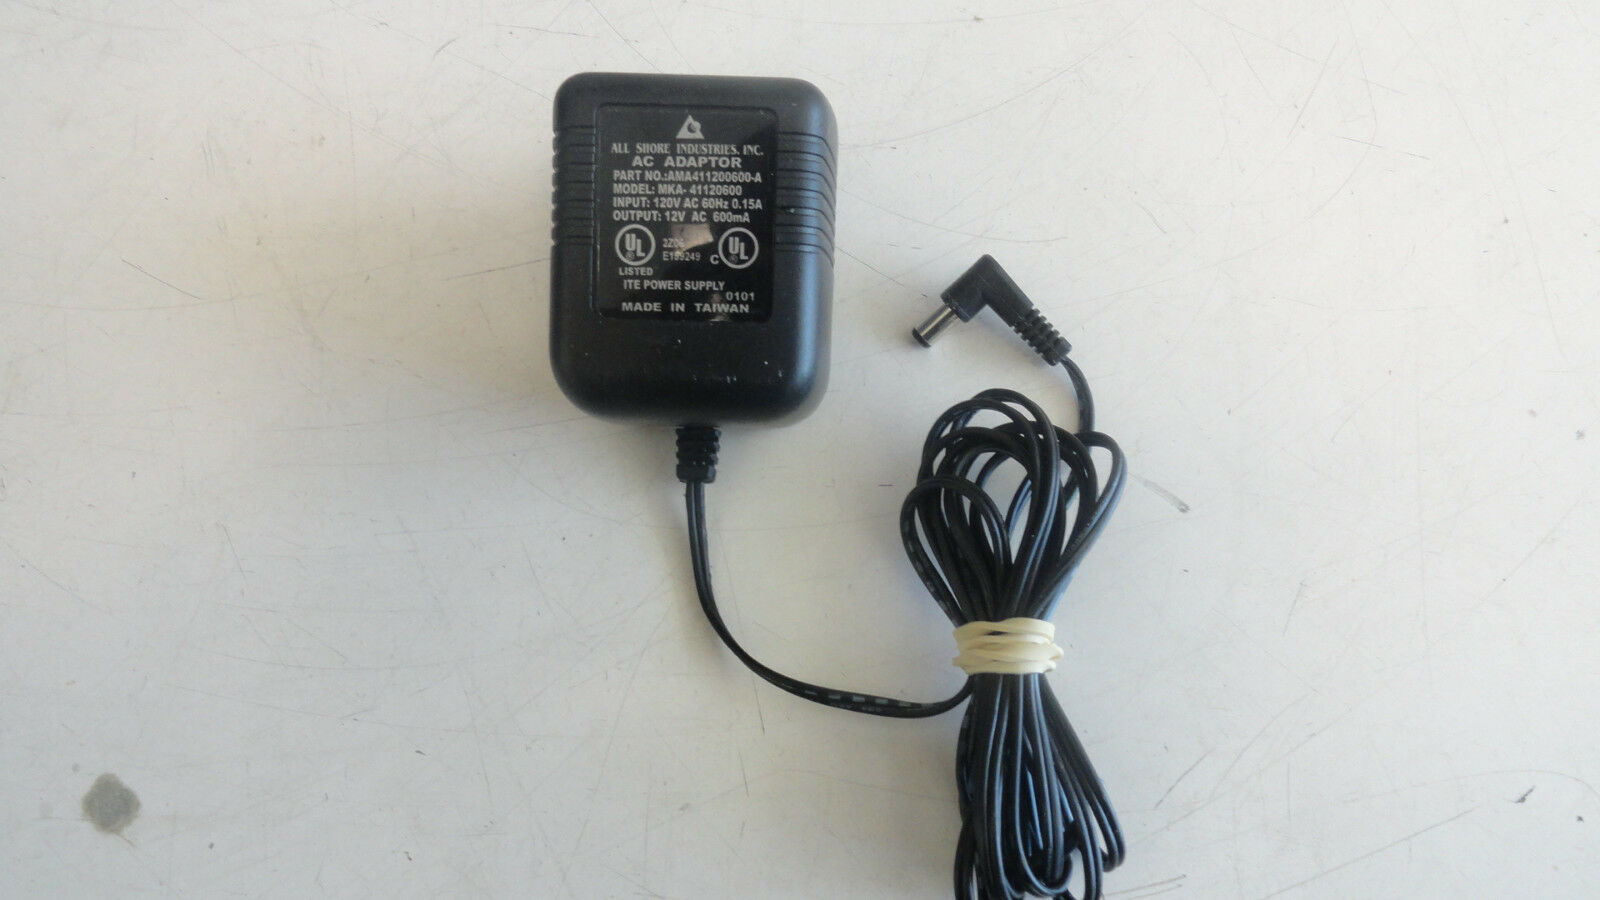 BB2: Genuine All Shores MKA-41120600 Charger Adapter Power Supply Brand: All Shores Type: Power Adapter Compatibl - Click Image to Close